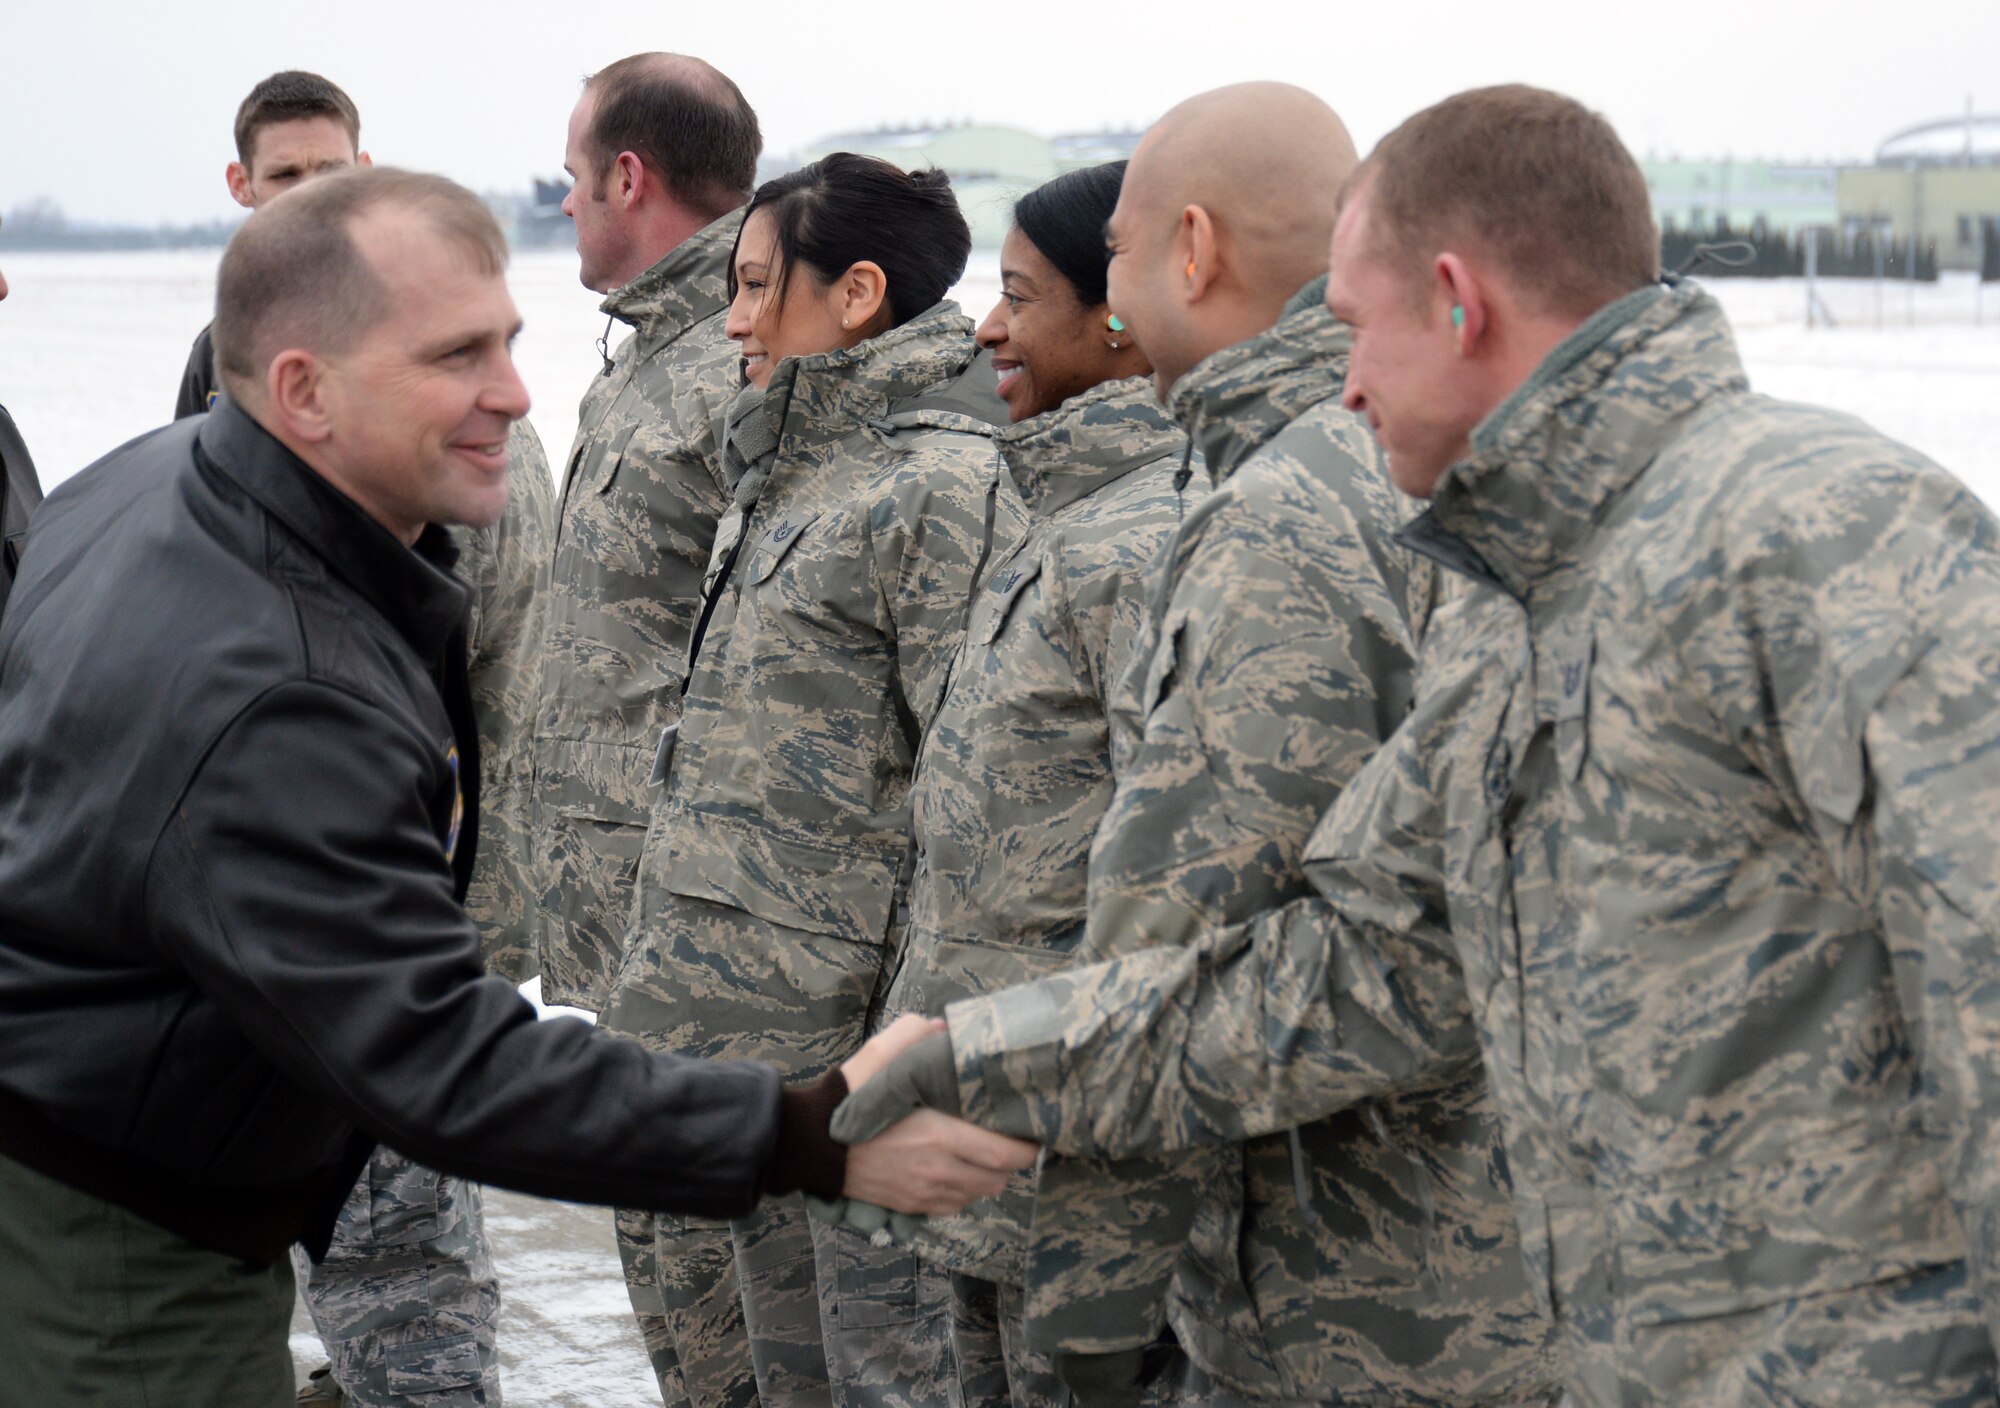 Col. Robert Winkler, 52nd Operations Group commander, shakes hands with Airmen assigned to Detachment 1, 52nd Operations Group on the flightline of Lask Air Base, Poland, Jan. 29, 2014. The mission of Detachment 1 is to foster bilateral defense ties, enhance regional security and increase interoperability among NATO allies through combined training exercises with periodic rotational aircraft. (U.S. Air Force photo by Staff Sgt. Joe W. McFadden / Released)